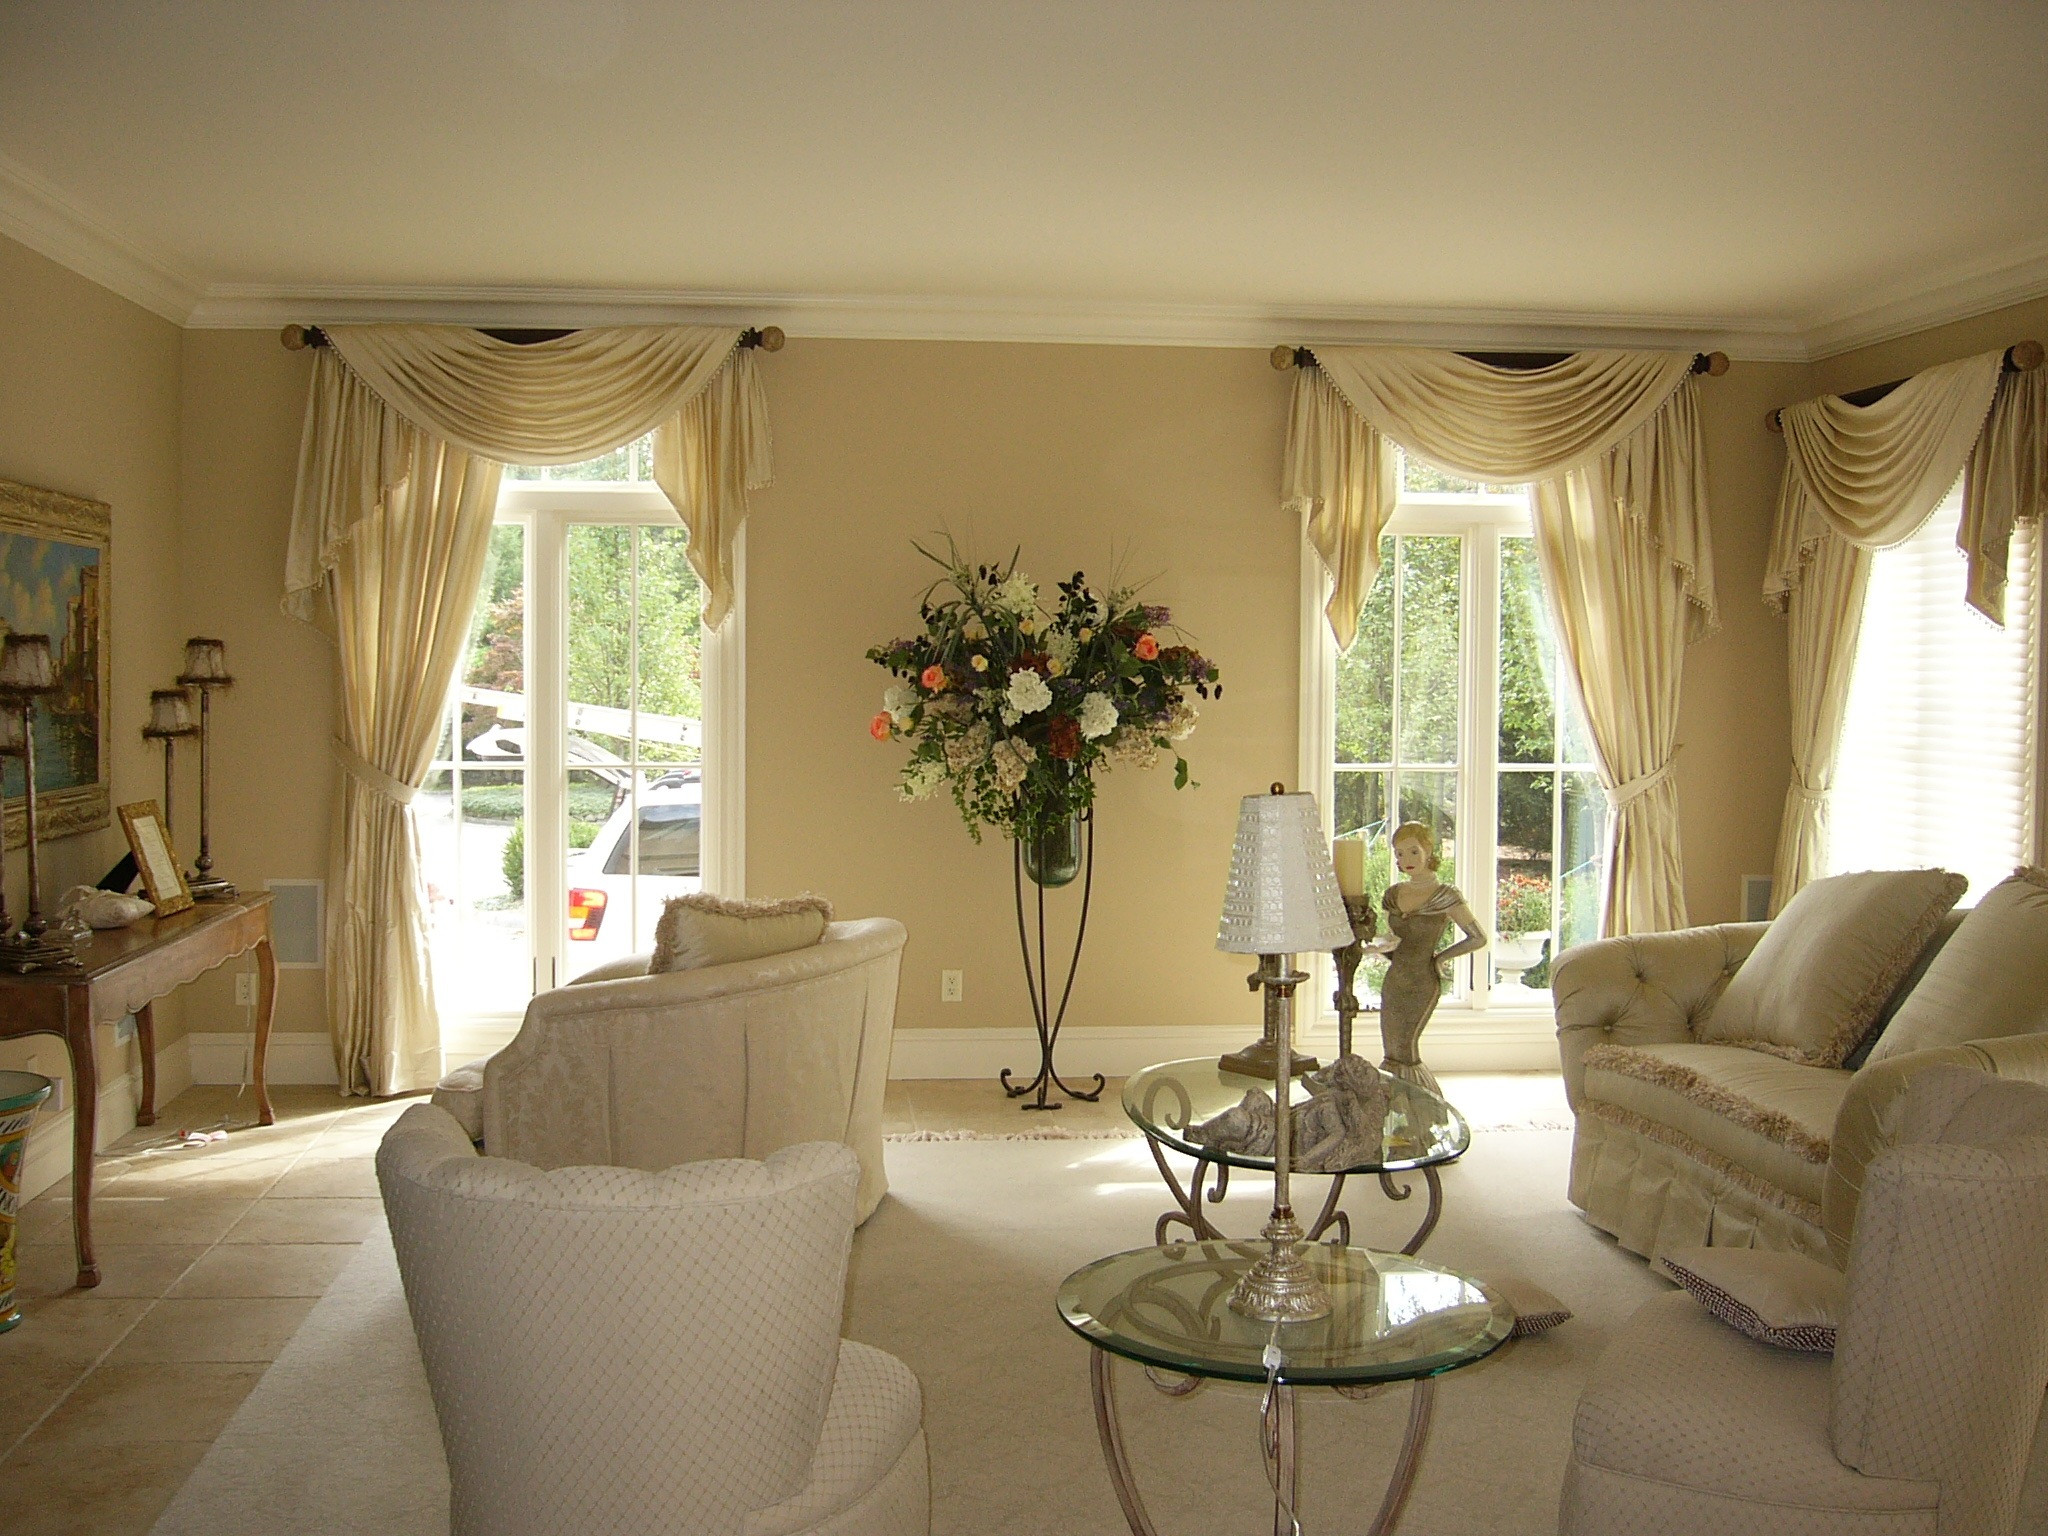 Swag Curtains For Living Room
 Valances and Swags by Curtains Boutique in NJ